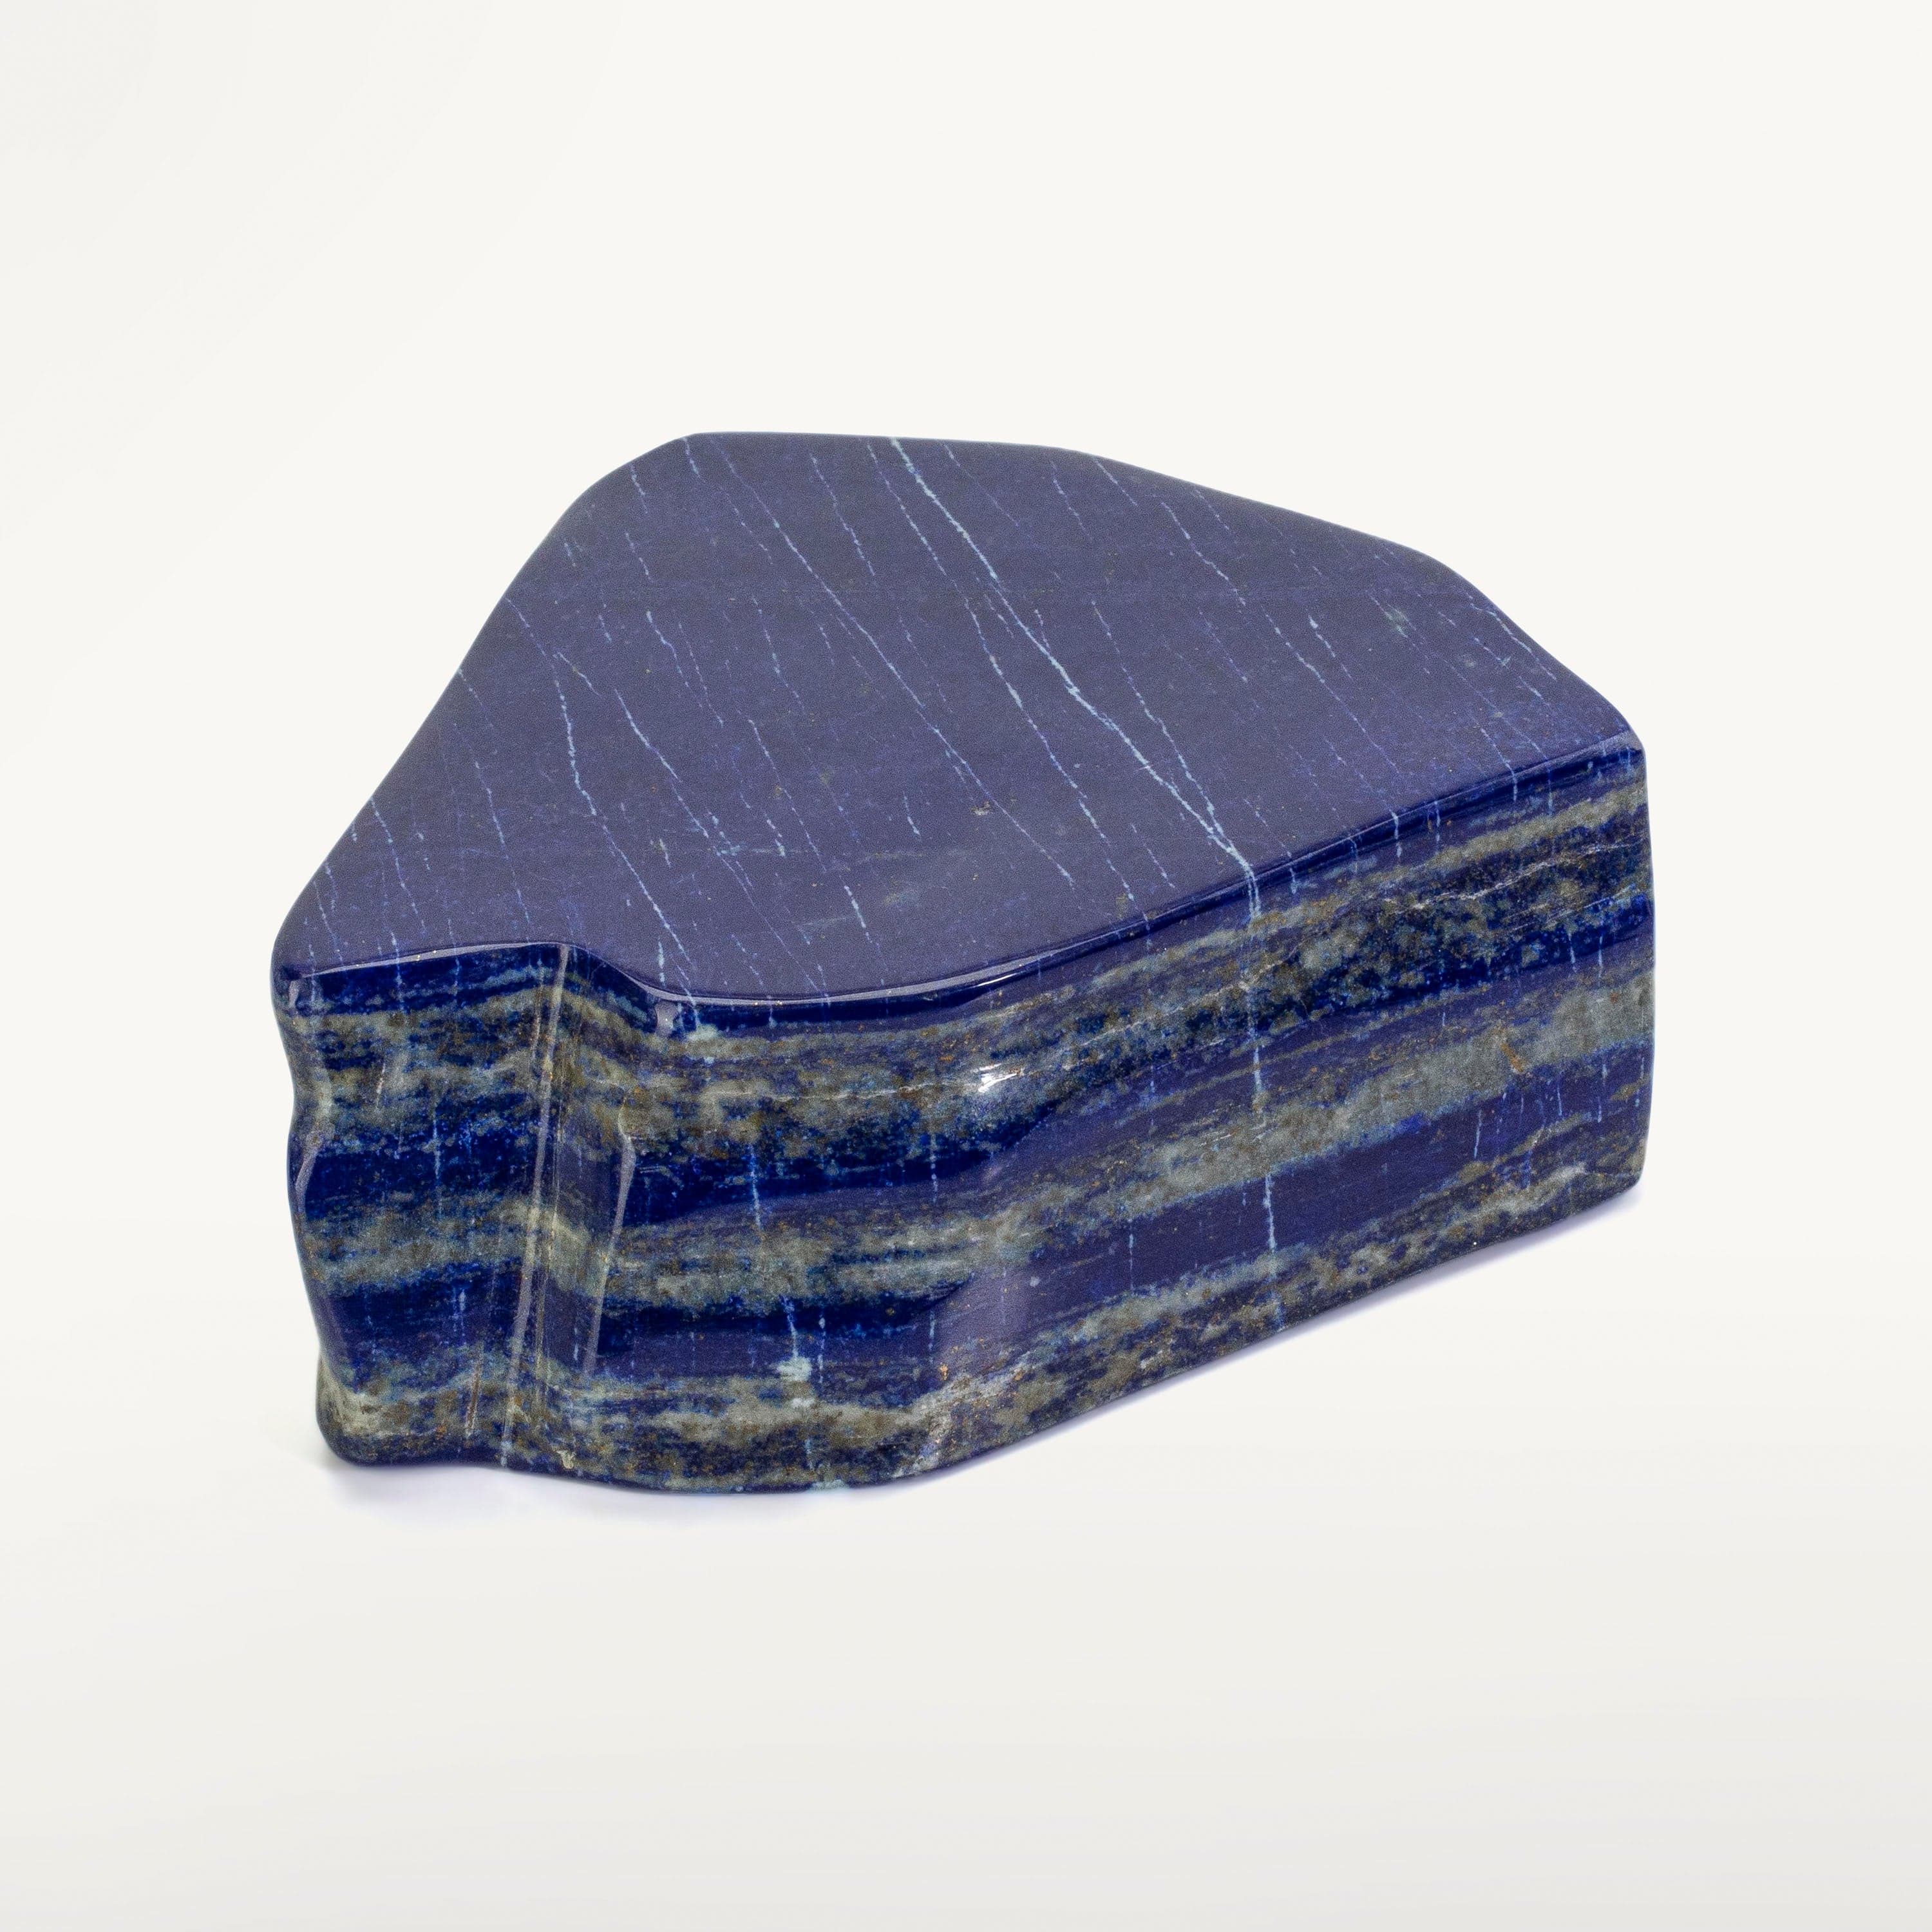 Kalifano Lapis Lapis Lazuil Freeform from Afghanistan - 2.5 kg / 5.5 lbs LP2700.001